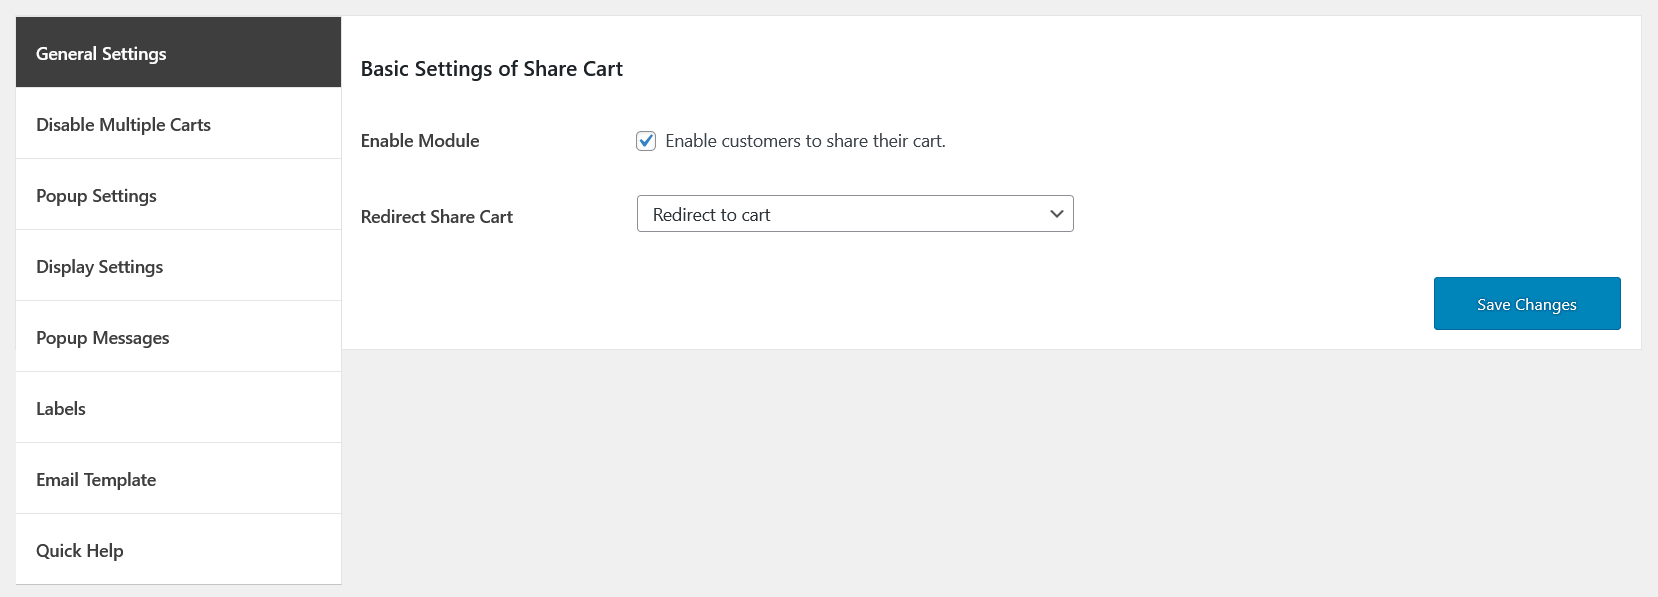 save and share cart generl settings